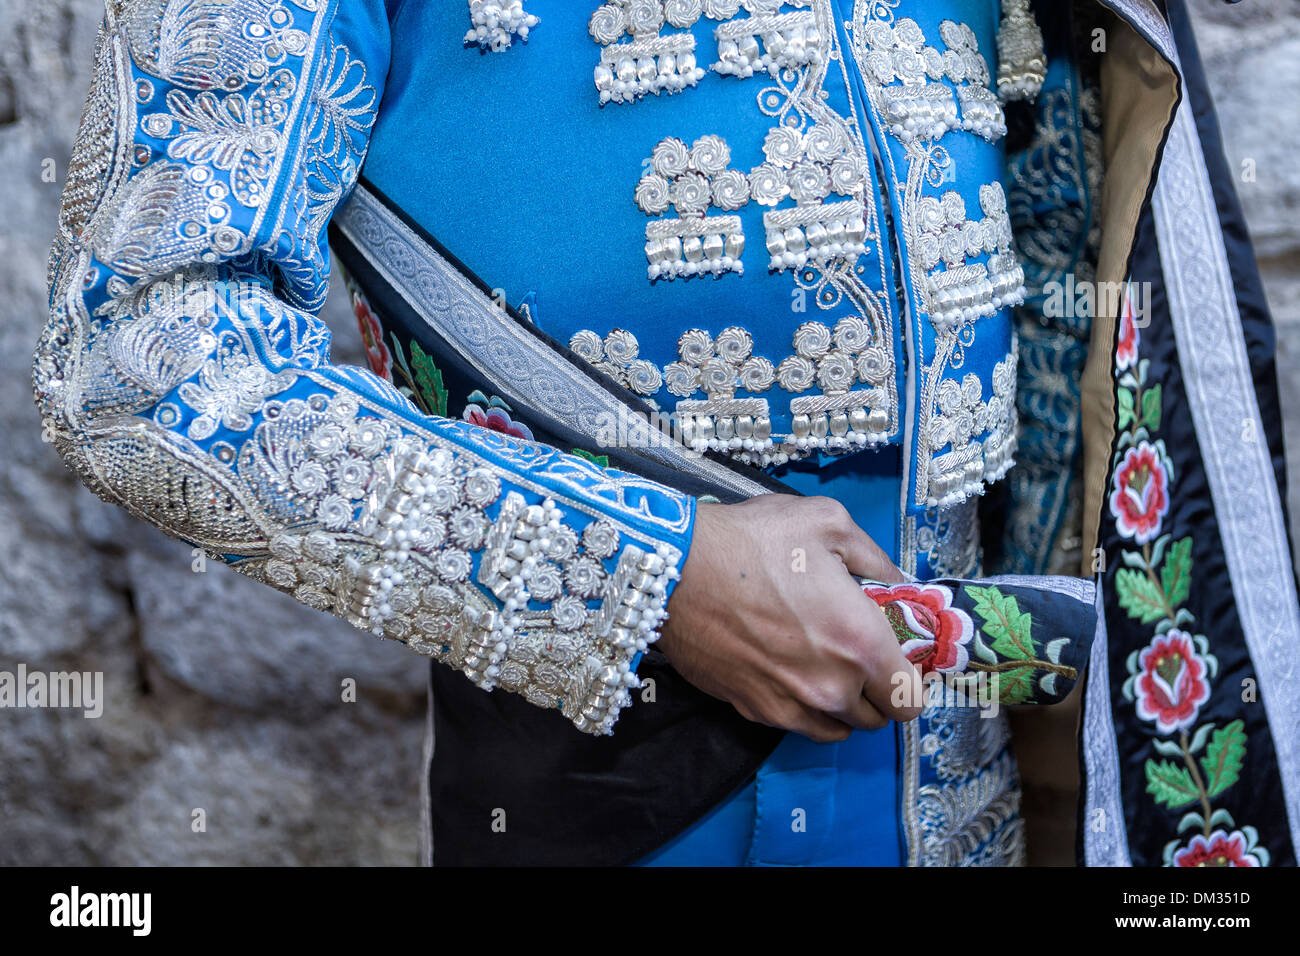 Spanish Bullfighter with blue dress and silver ornaments, the mantle is placed to start the paseíllo before beginning the bullfi Stock Photo